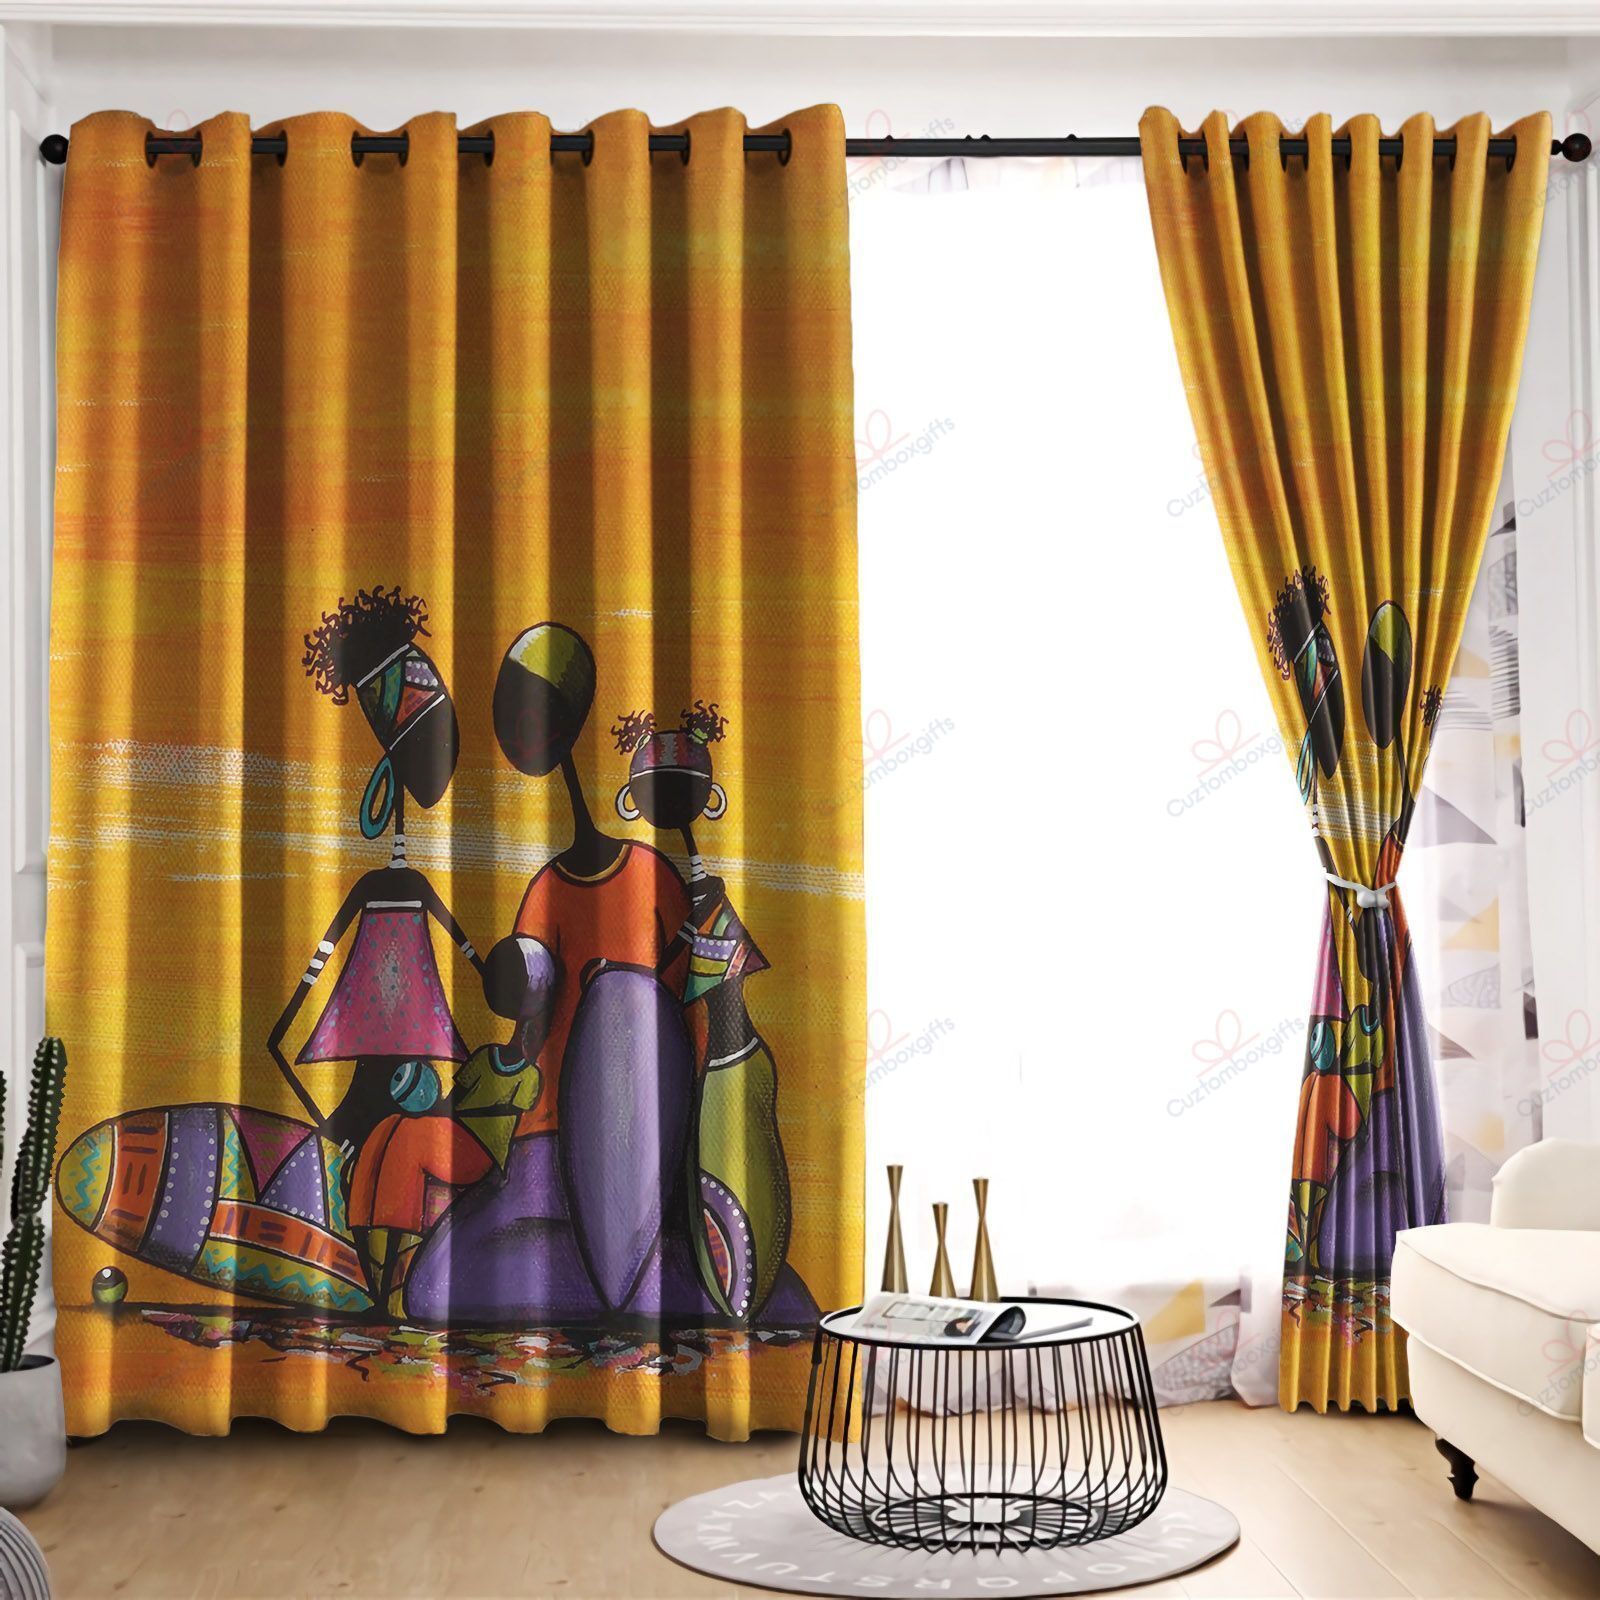 African Woman's Life Printed Window Curtain Home Decor